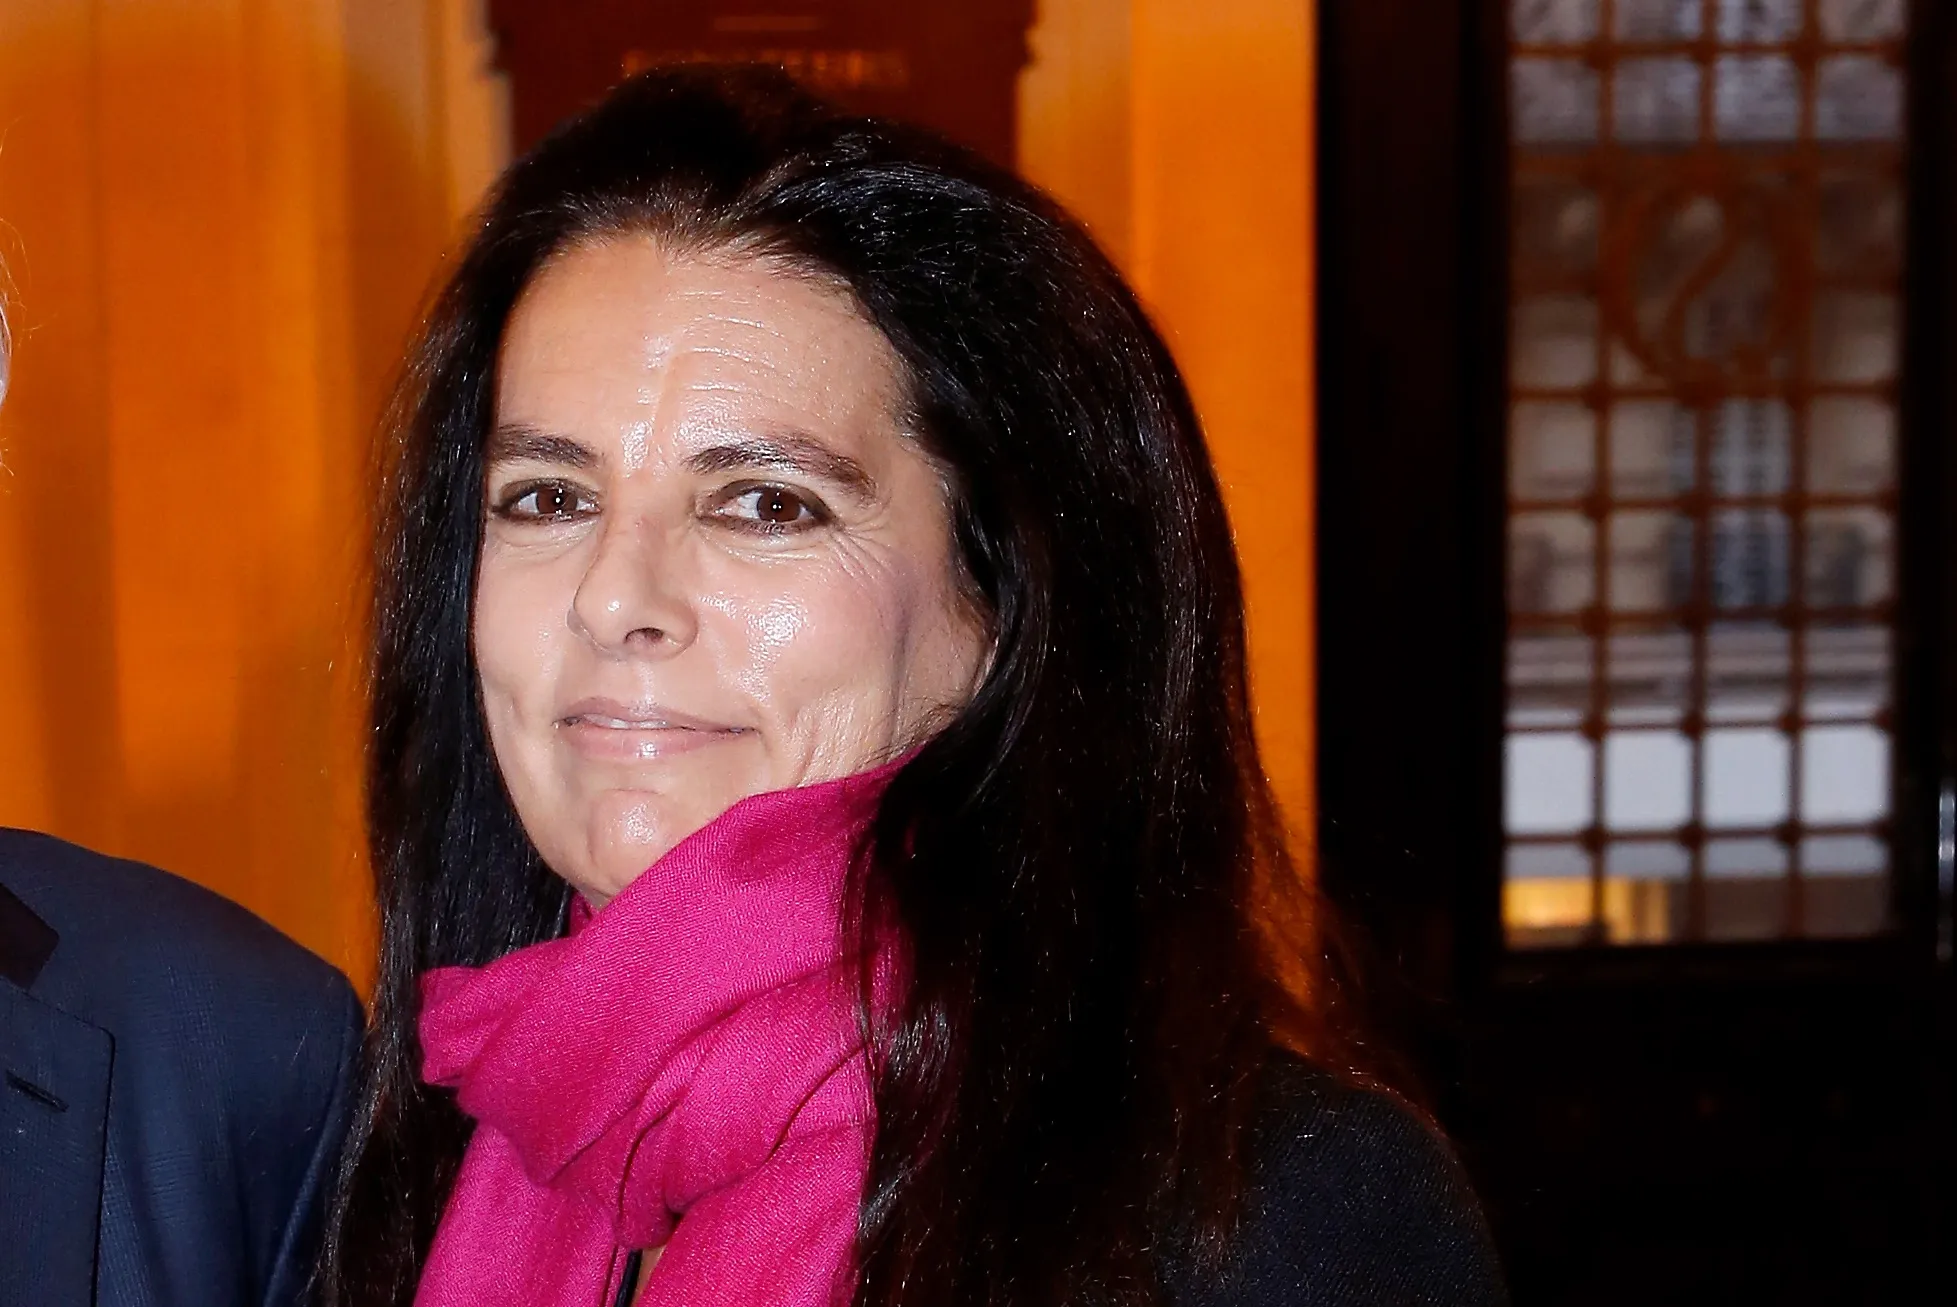 Meet the New 'World's Richest Woman,' a 64-Year-Old Expert on Greek Gods Who Shuns the Spotlight